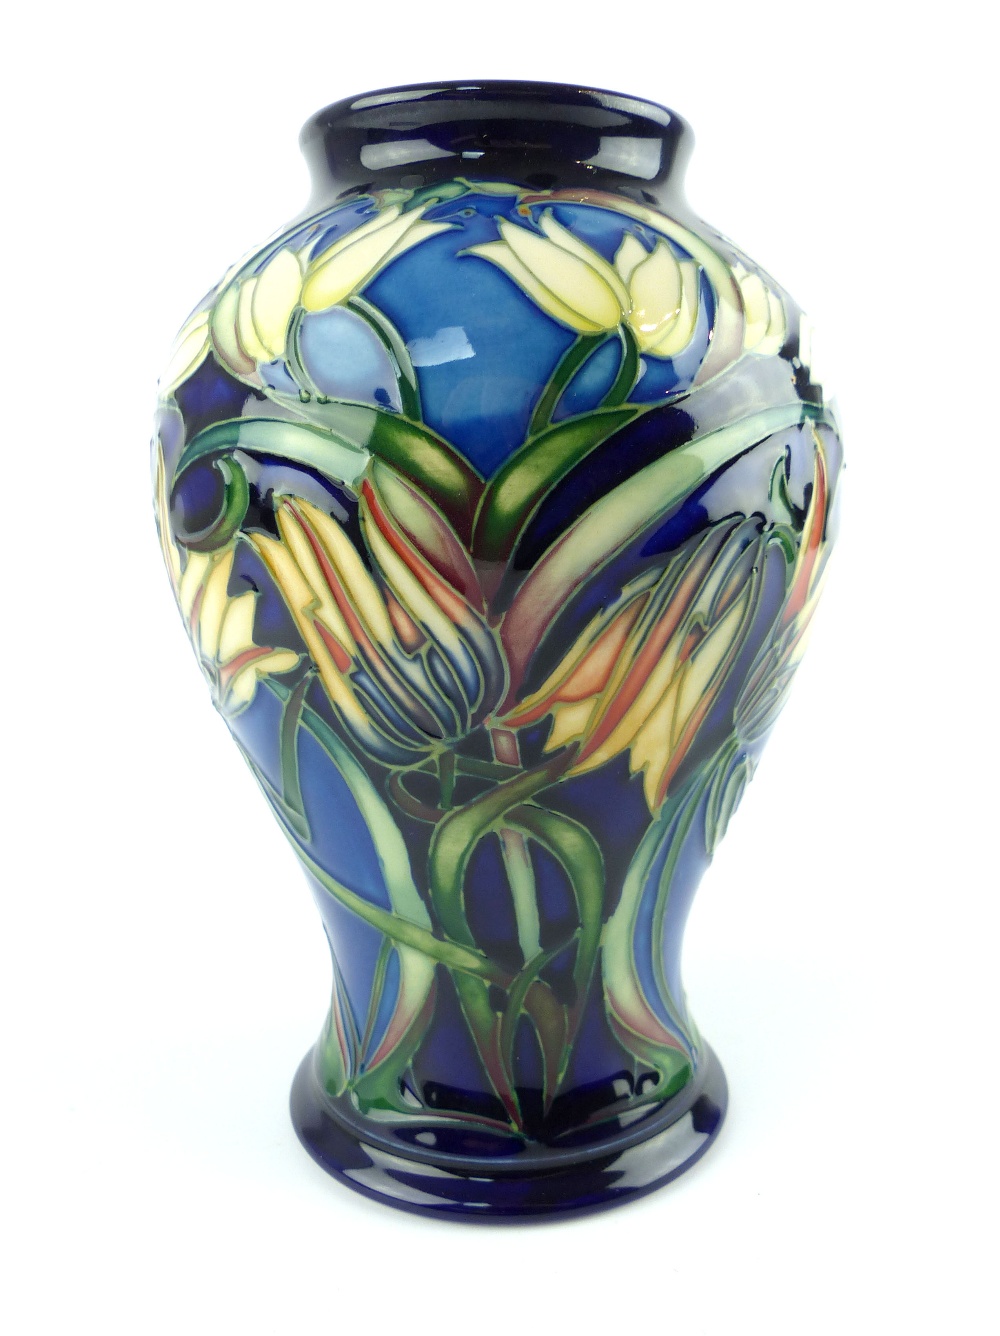 Moorcroft Pottery tubeline vase, Loch Hope pattern, designed by Philip Gibson, 2004, boxed, 15.8cm - Image 4 of 8